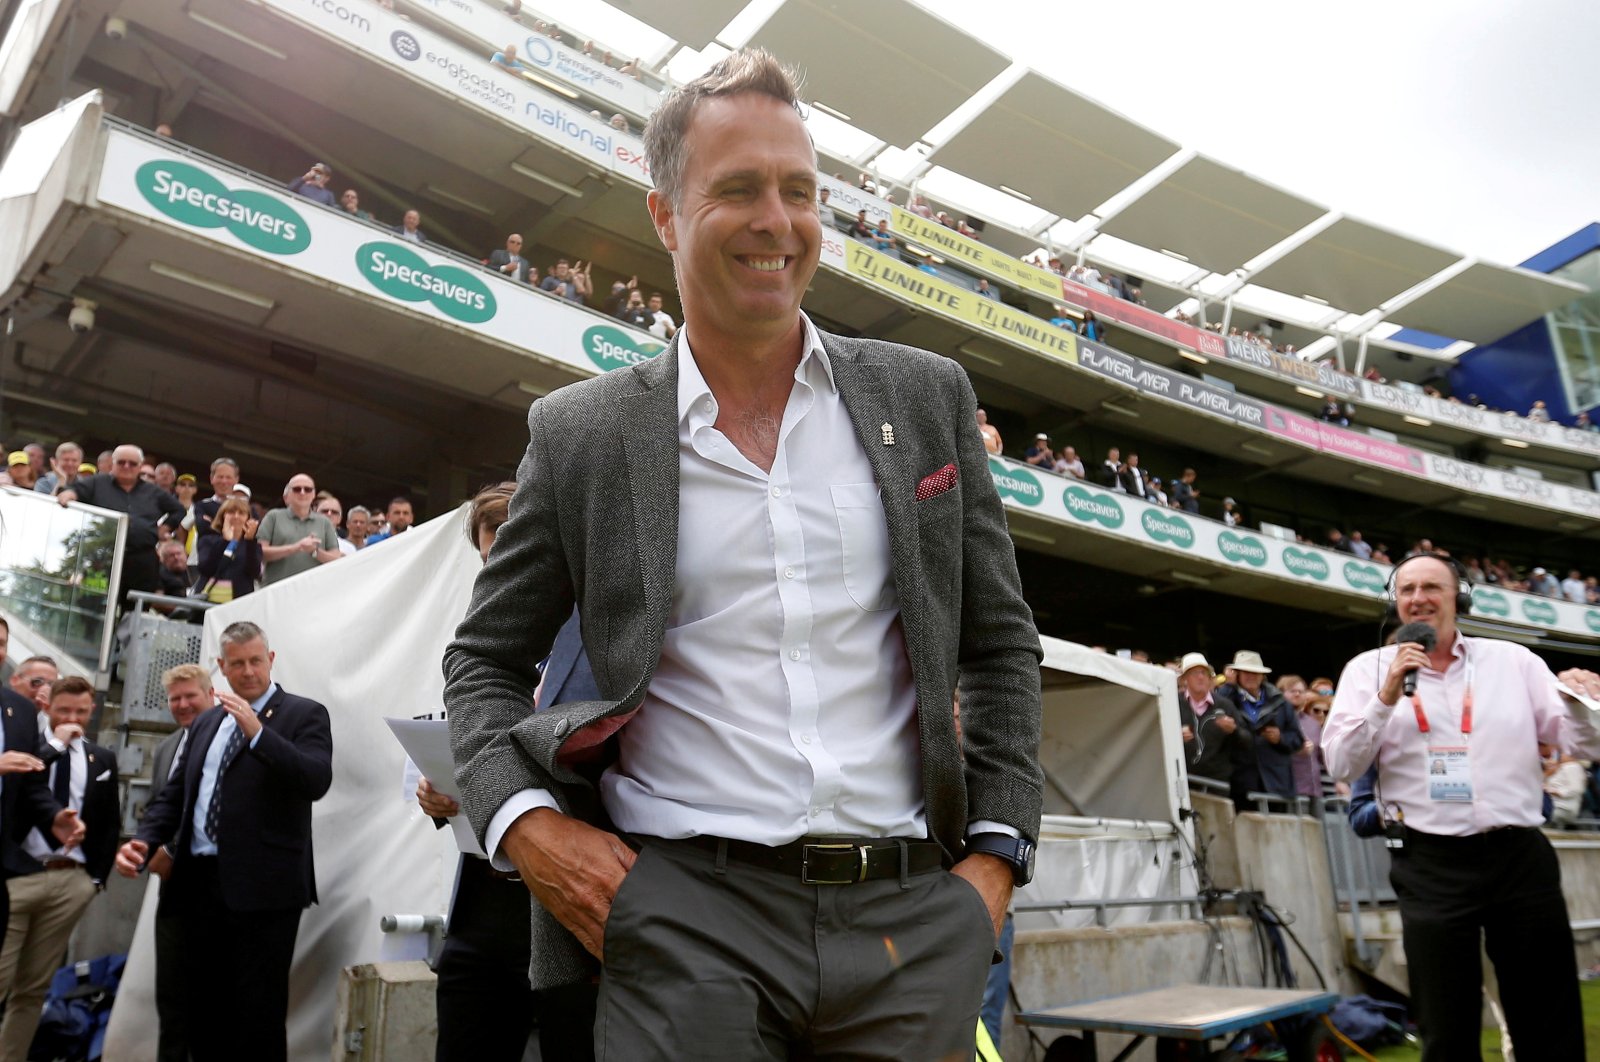 Former England cricketer Michael Vaughan during a break in play at the Ashes 2019 First Test between England and Australia, Edgbaston, Birmingham, England, Aug. 1, 2019.